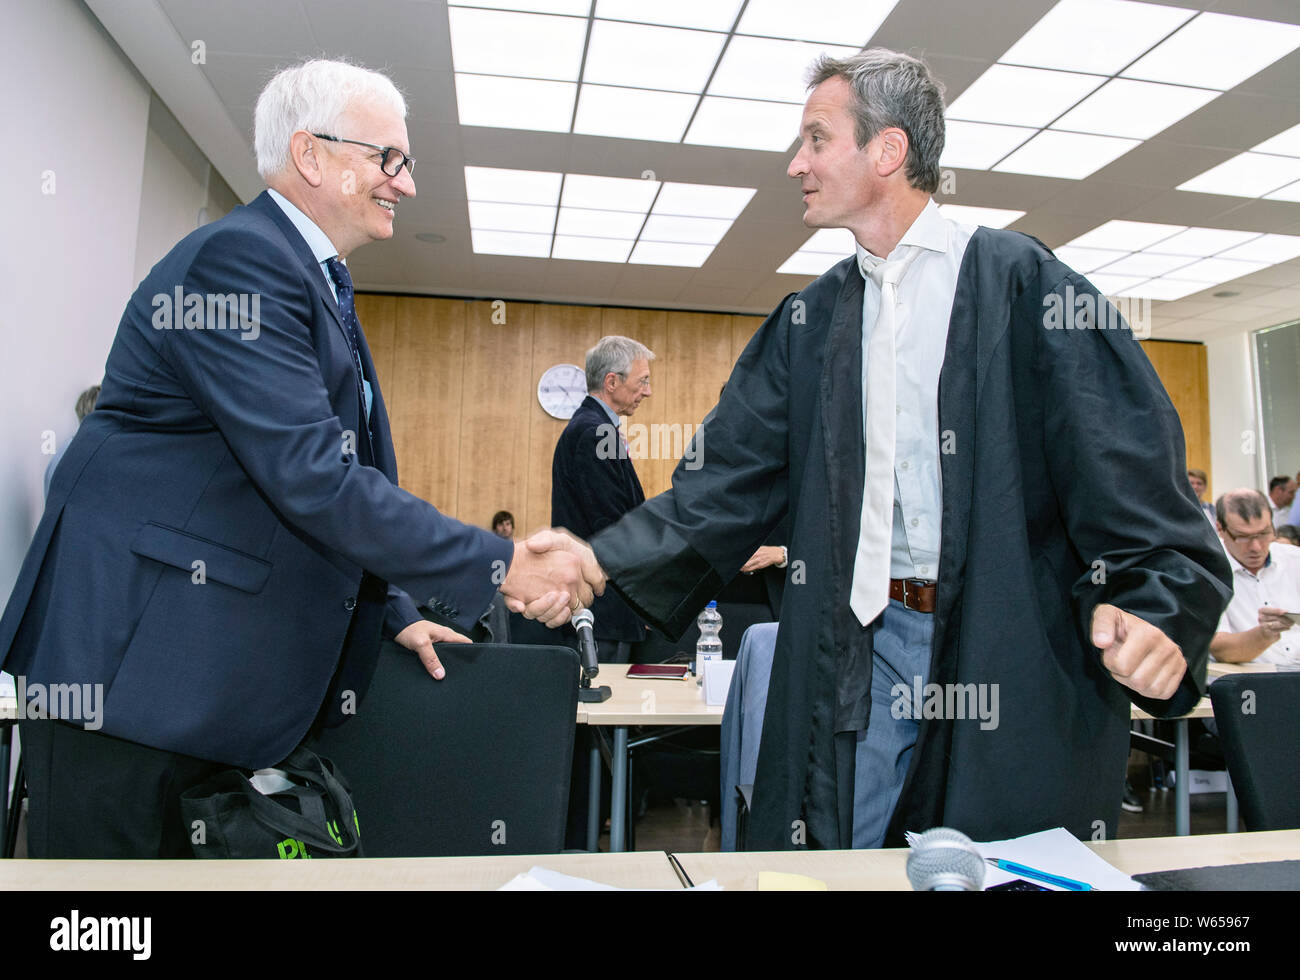 31 July 2019, North Rhine-Westphalia, Münster: Jürgen Resch (l), federal managing director of the German environmental assistance, welcomes the attorney Remo Klinger before the negotiation. The Higher Administrative Court of North Rhine-Westphalia is hearing the action brought by Deutsche Umwelthilfe (German Environmental Aid) against the city of Aachen for the continuation of the Cologne district government's air pollution control plans. The aim is to take measures to ensure that the limit values for nitrogen dioxide are complied with as quickly as possible. Photo: Guido Kirchner/dpa Stock Photo